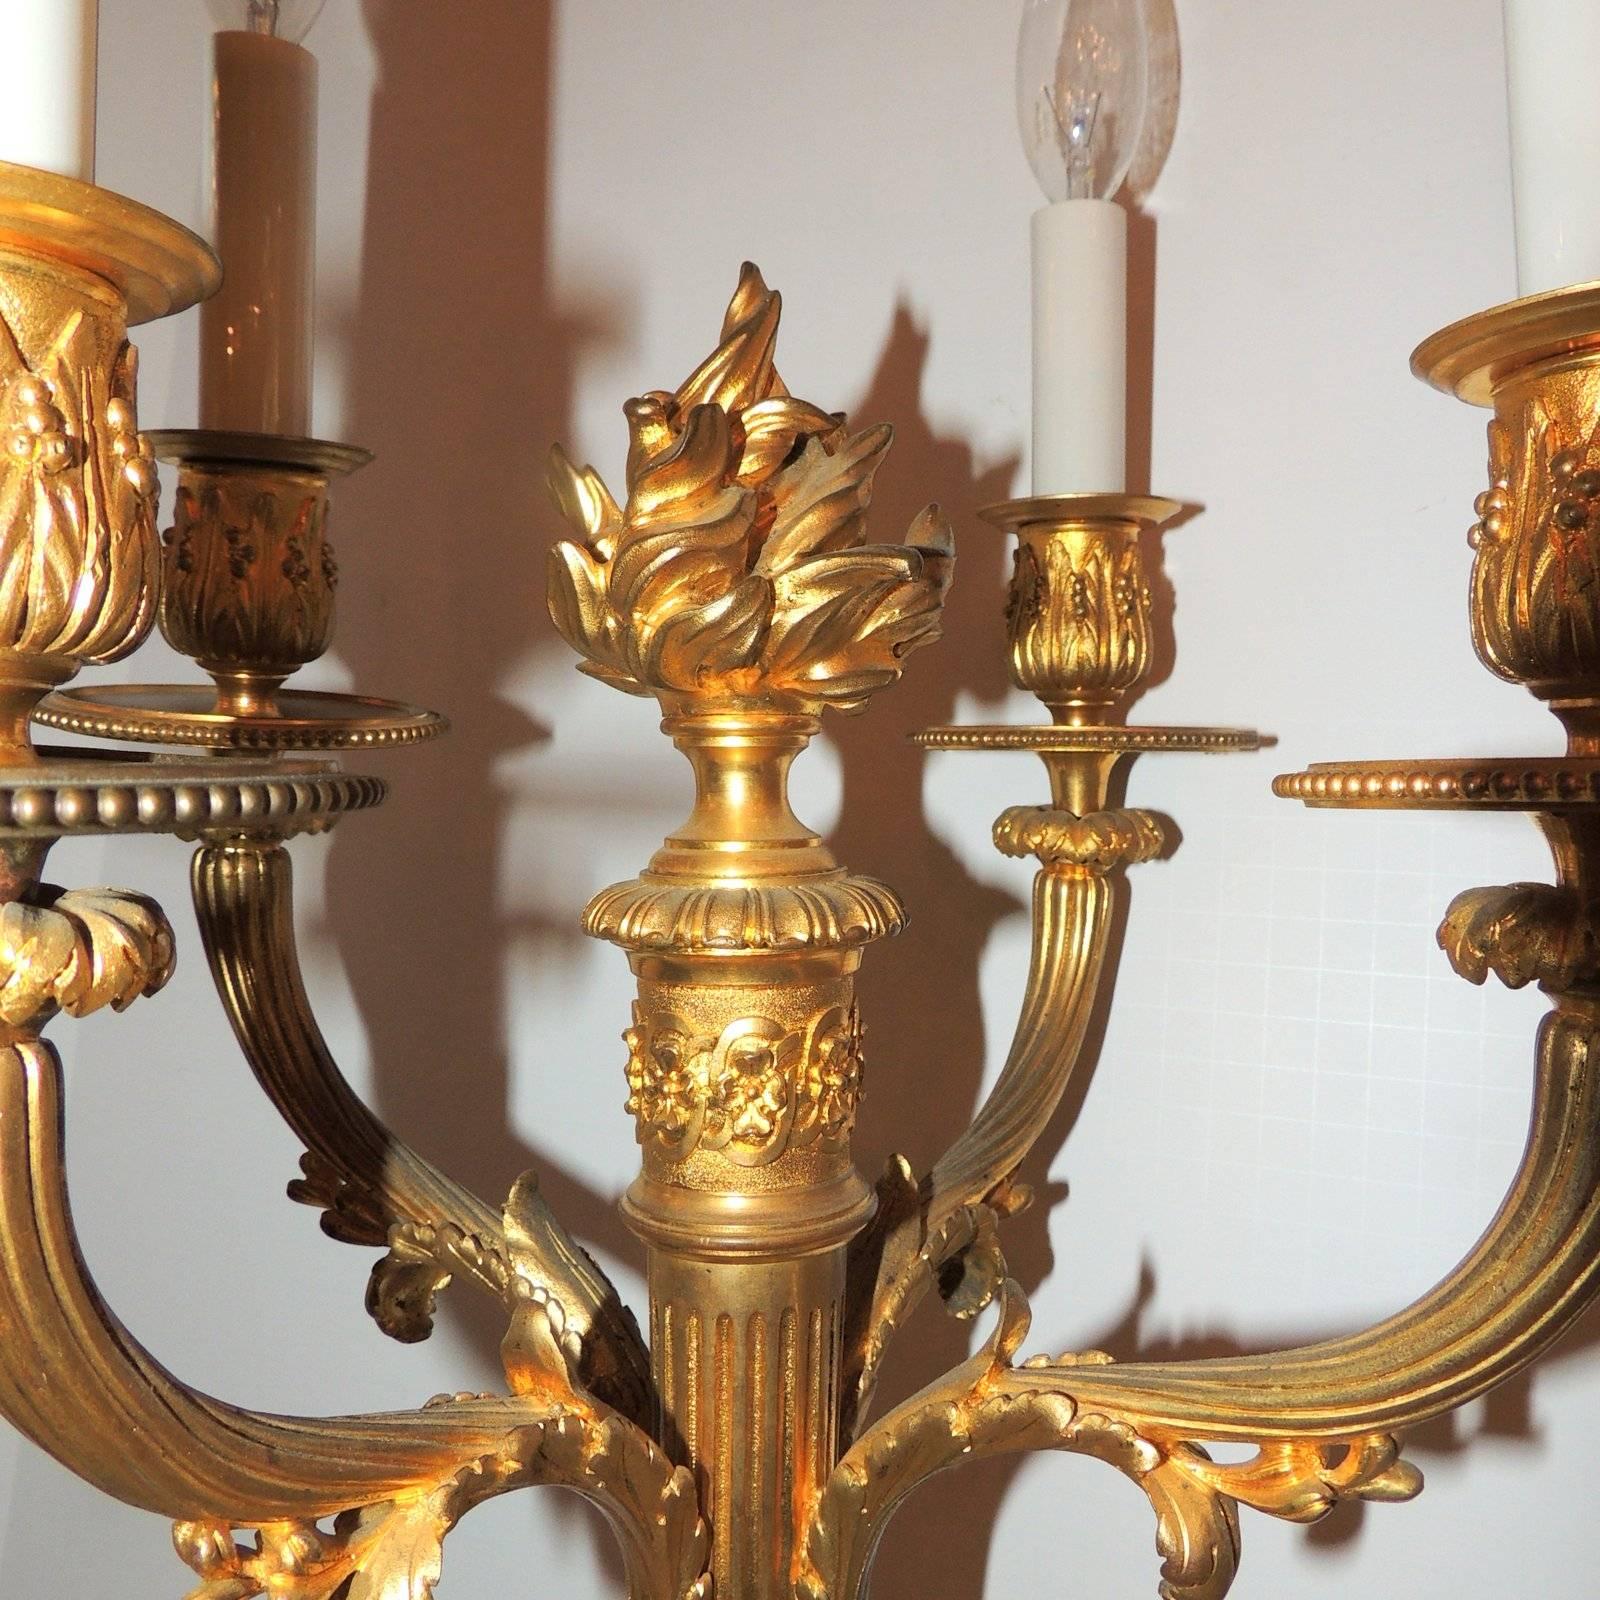 Mid-20th Century Wonderful Pair French Neoclassical Dore Bronze Regency Four-Arm Candelabra Lamps For Sale